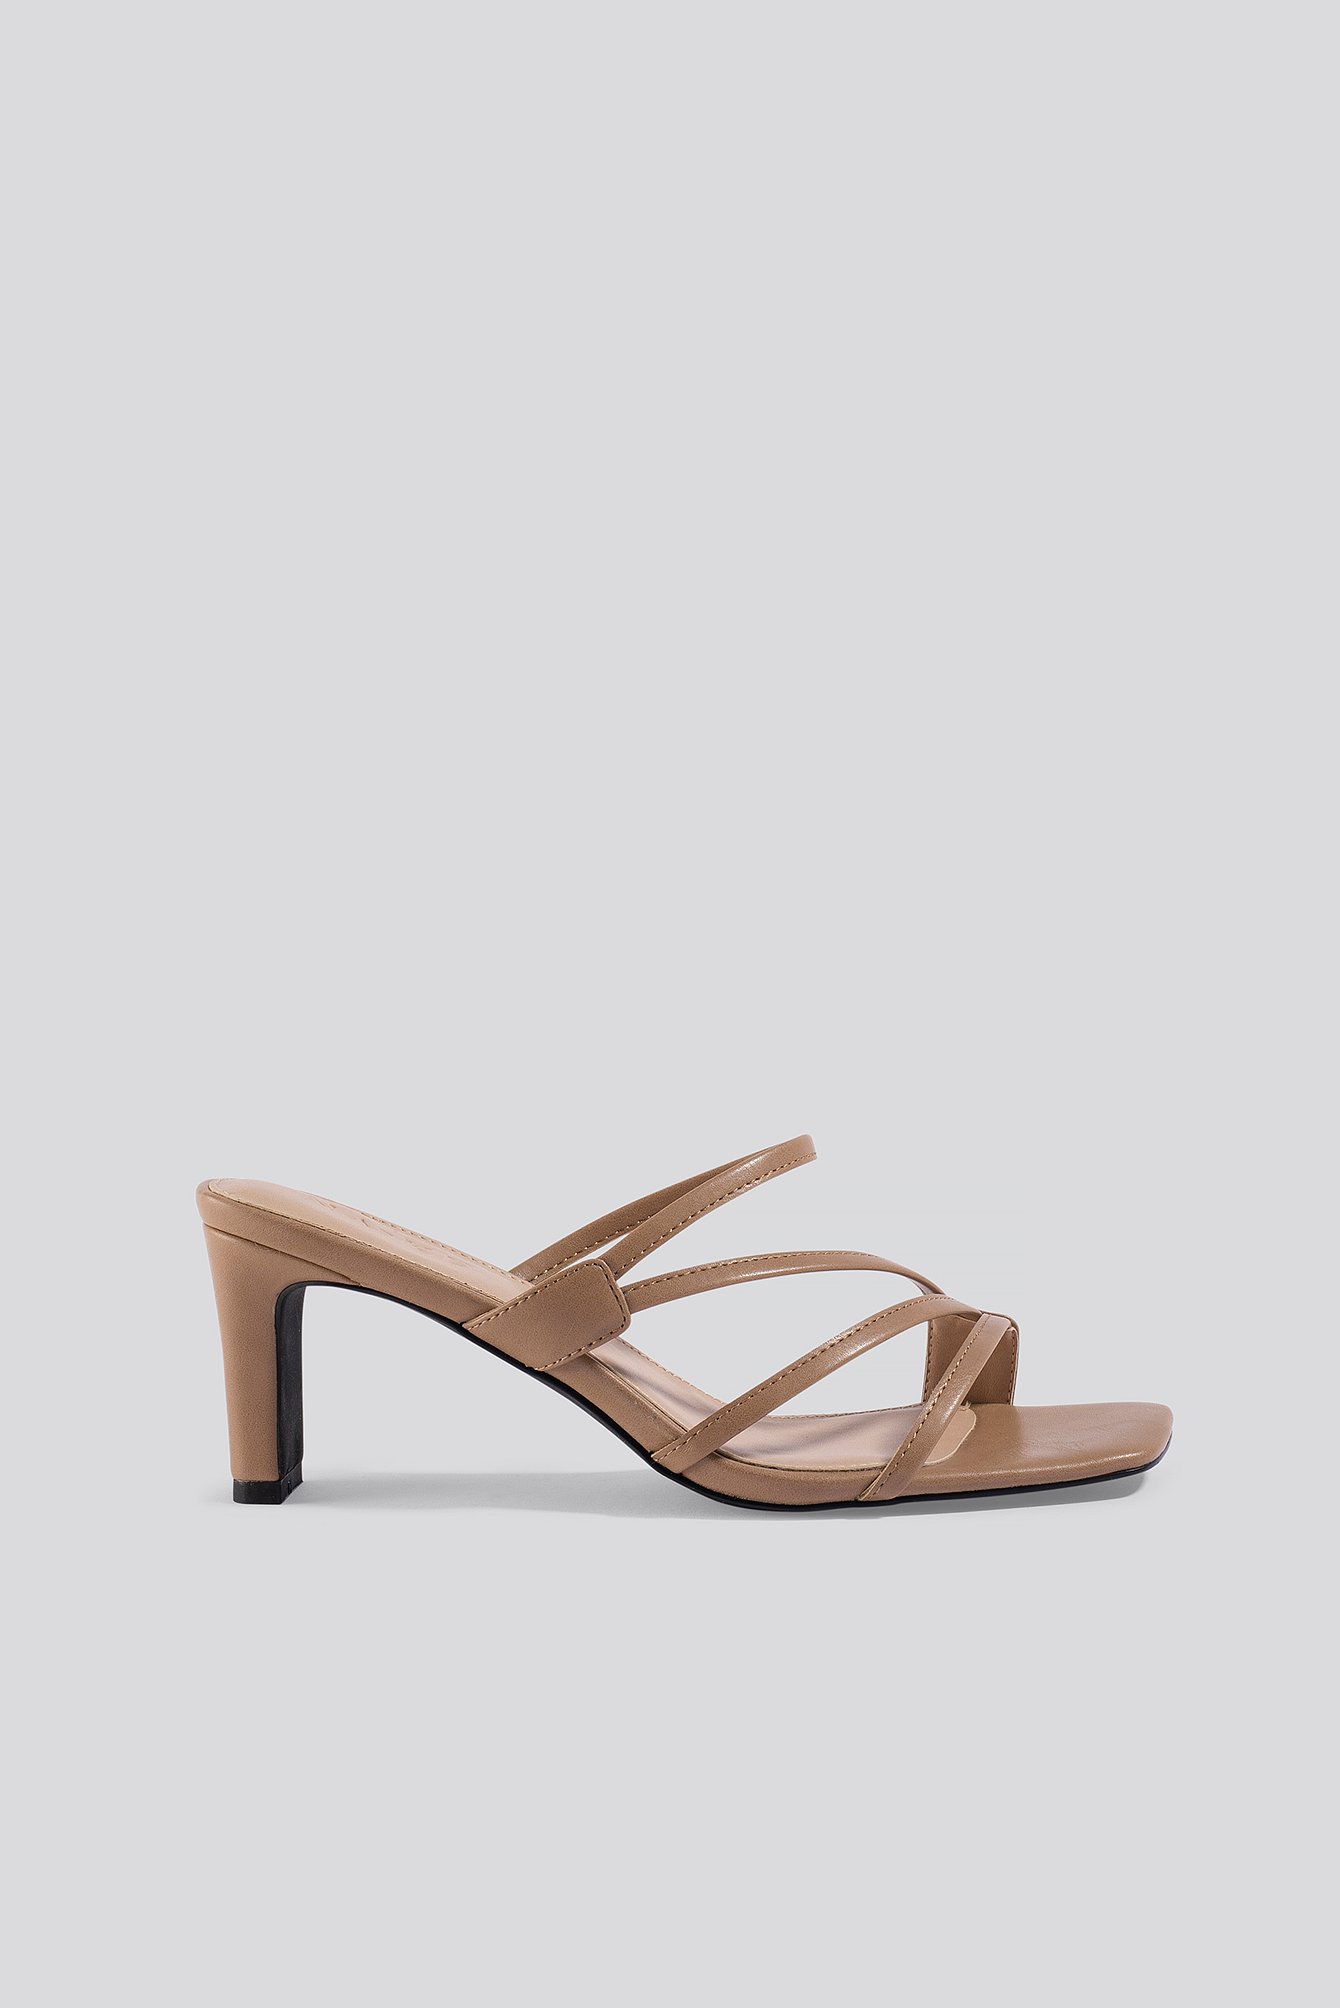 na-kd shoes -  Squared Strappy Sandals - Beige